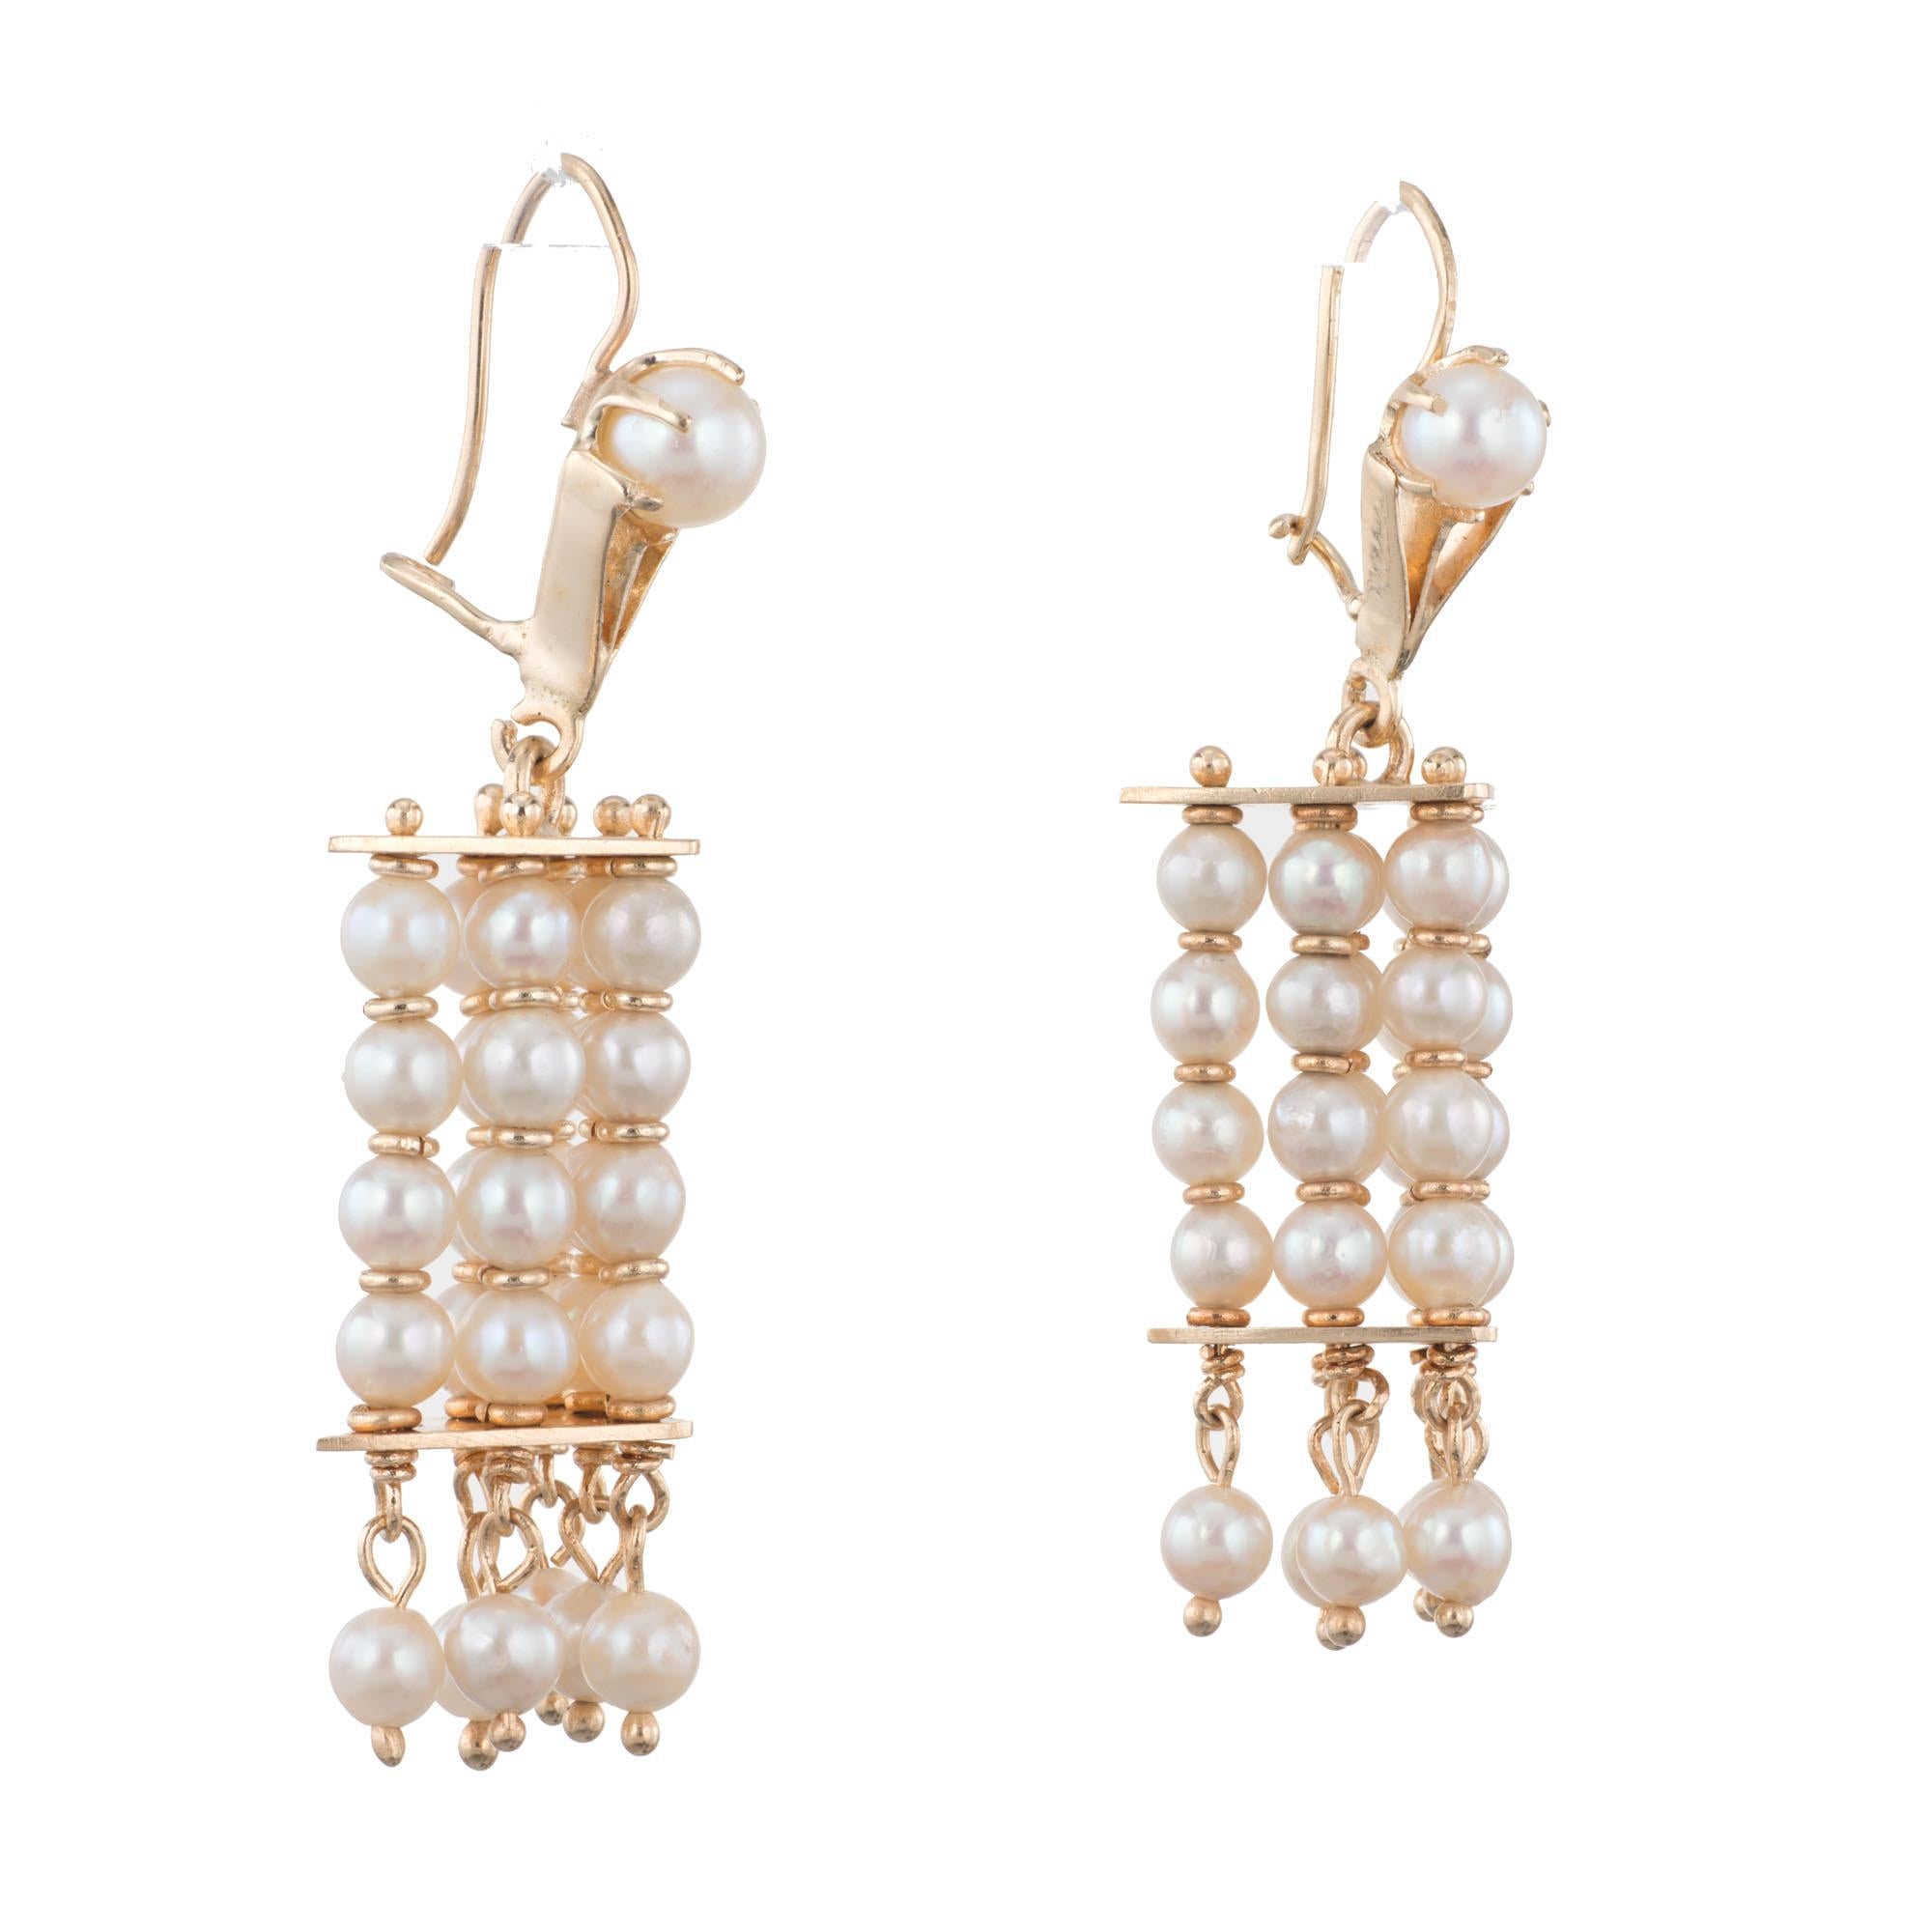 3-D cultured pearl dangle earrings, with 6 columns of pearls in a triangle shape. Wire top and pearl dangle bottom. 14k yellow gold.  Circa 1950's.

2 cultured pearls 5mm
60 cultured pearls 3.7mm
14k Yellow Gold
Tested: 14k
Stamped: 14k
11.8